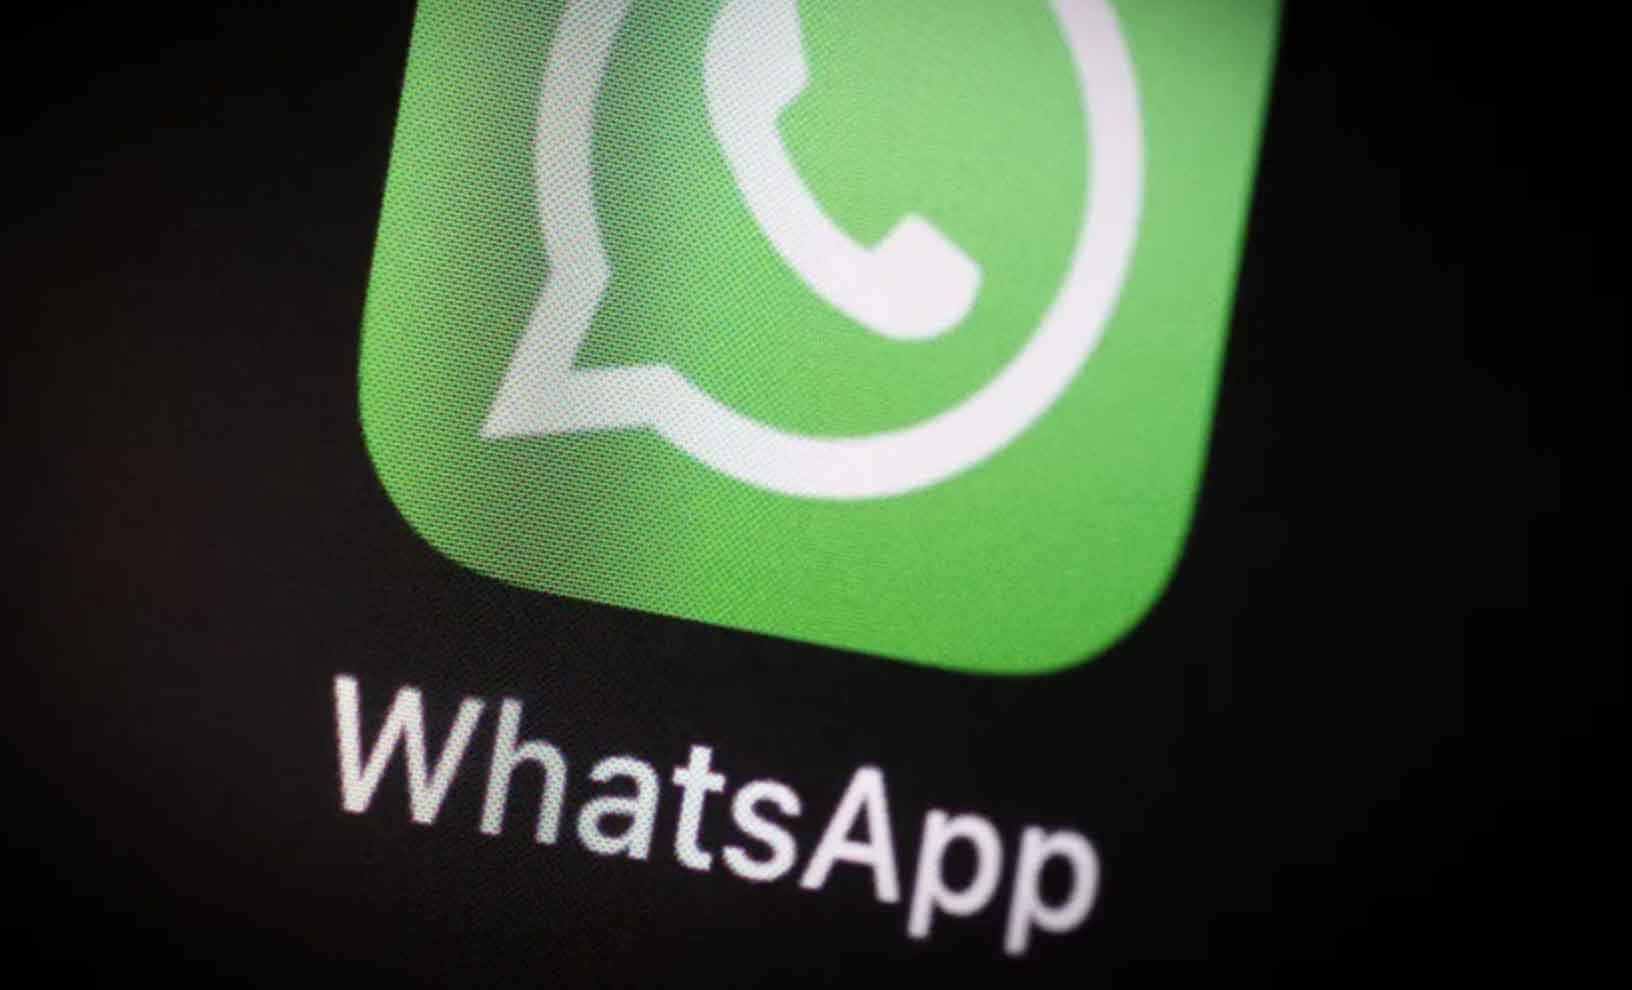 Users can now send themselves messages with WhatsApp's latest feature